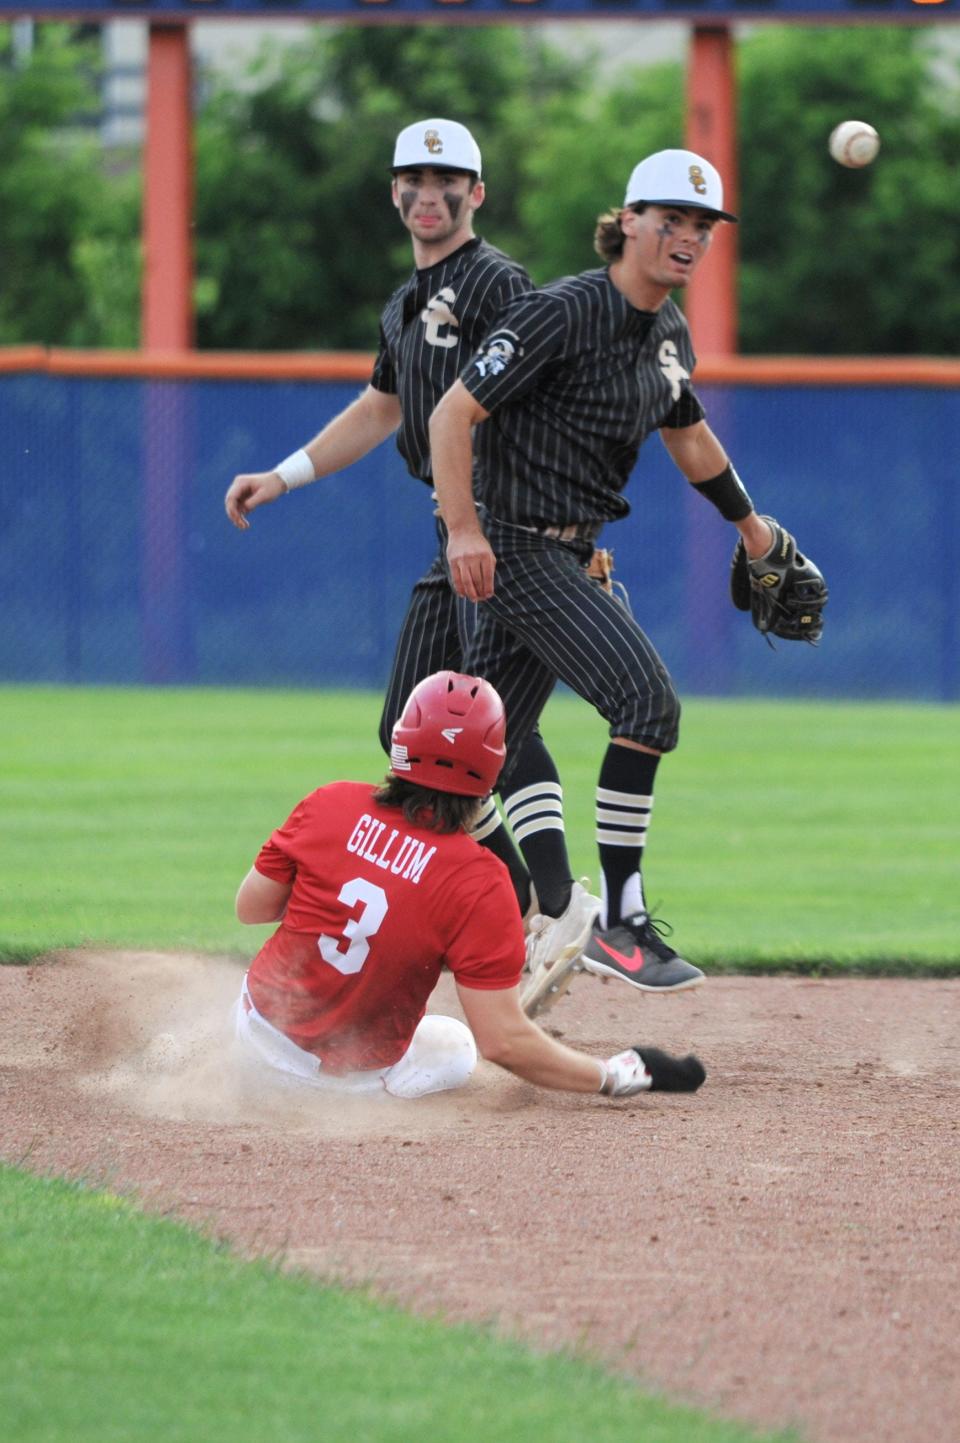 GALLERY: Plymouth vs South Central district championship baseball